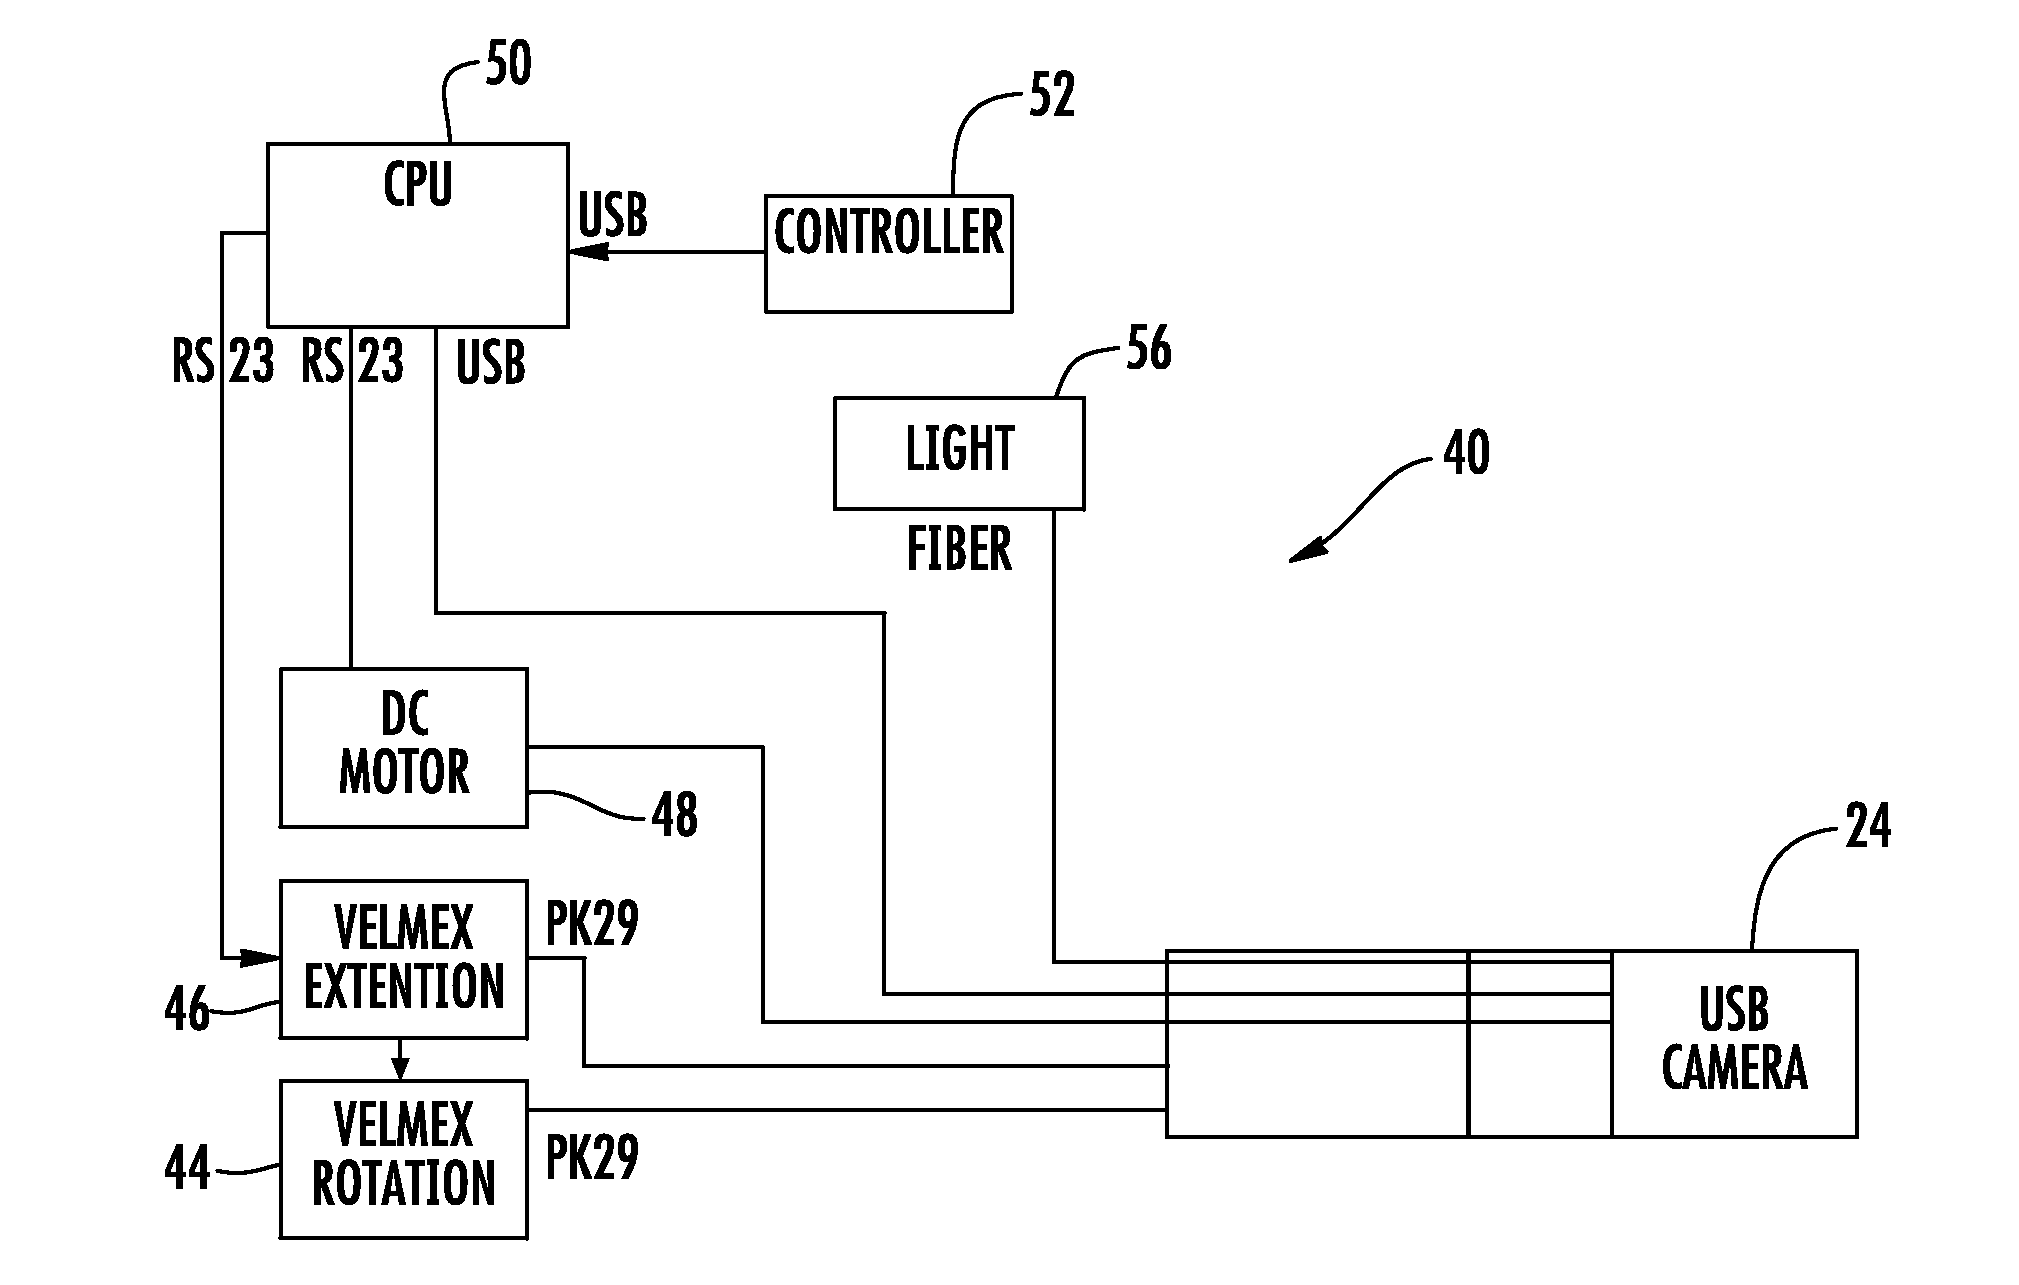 Inspection system for a combustor of a turbine engine